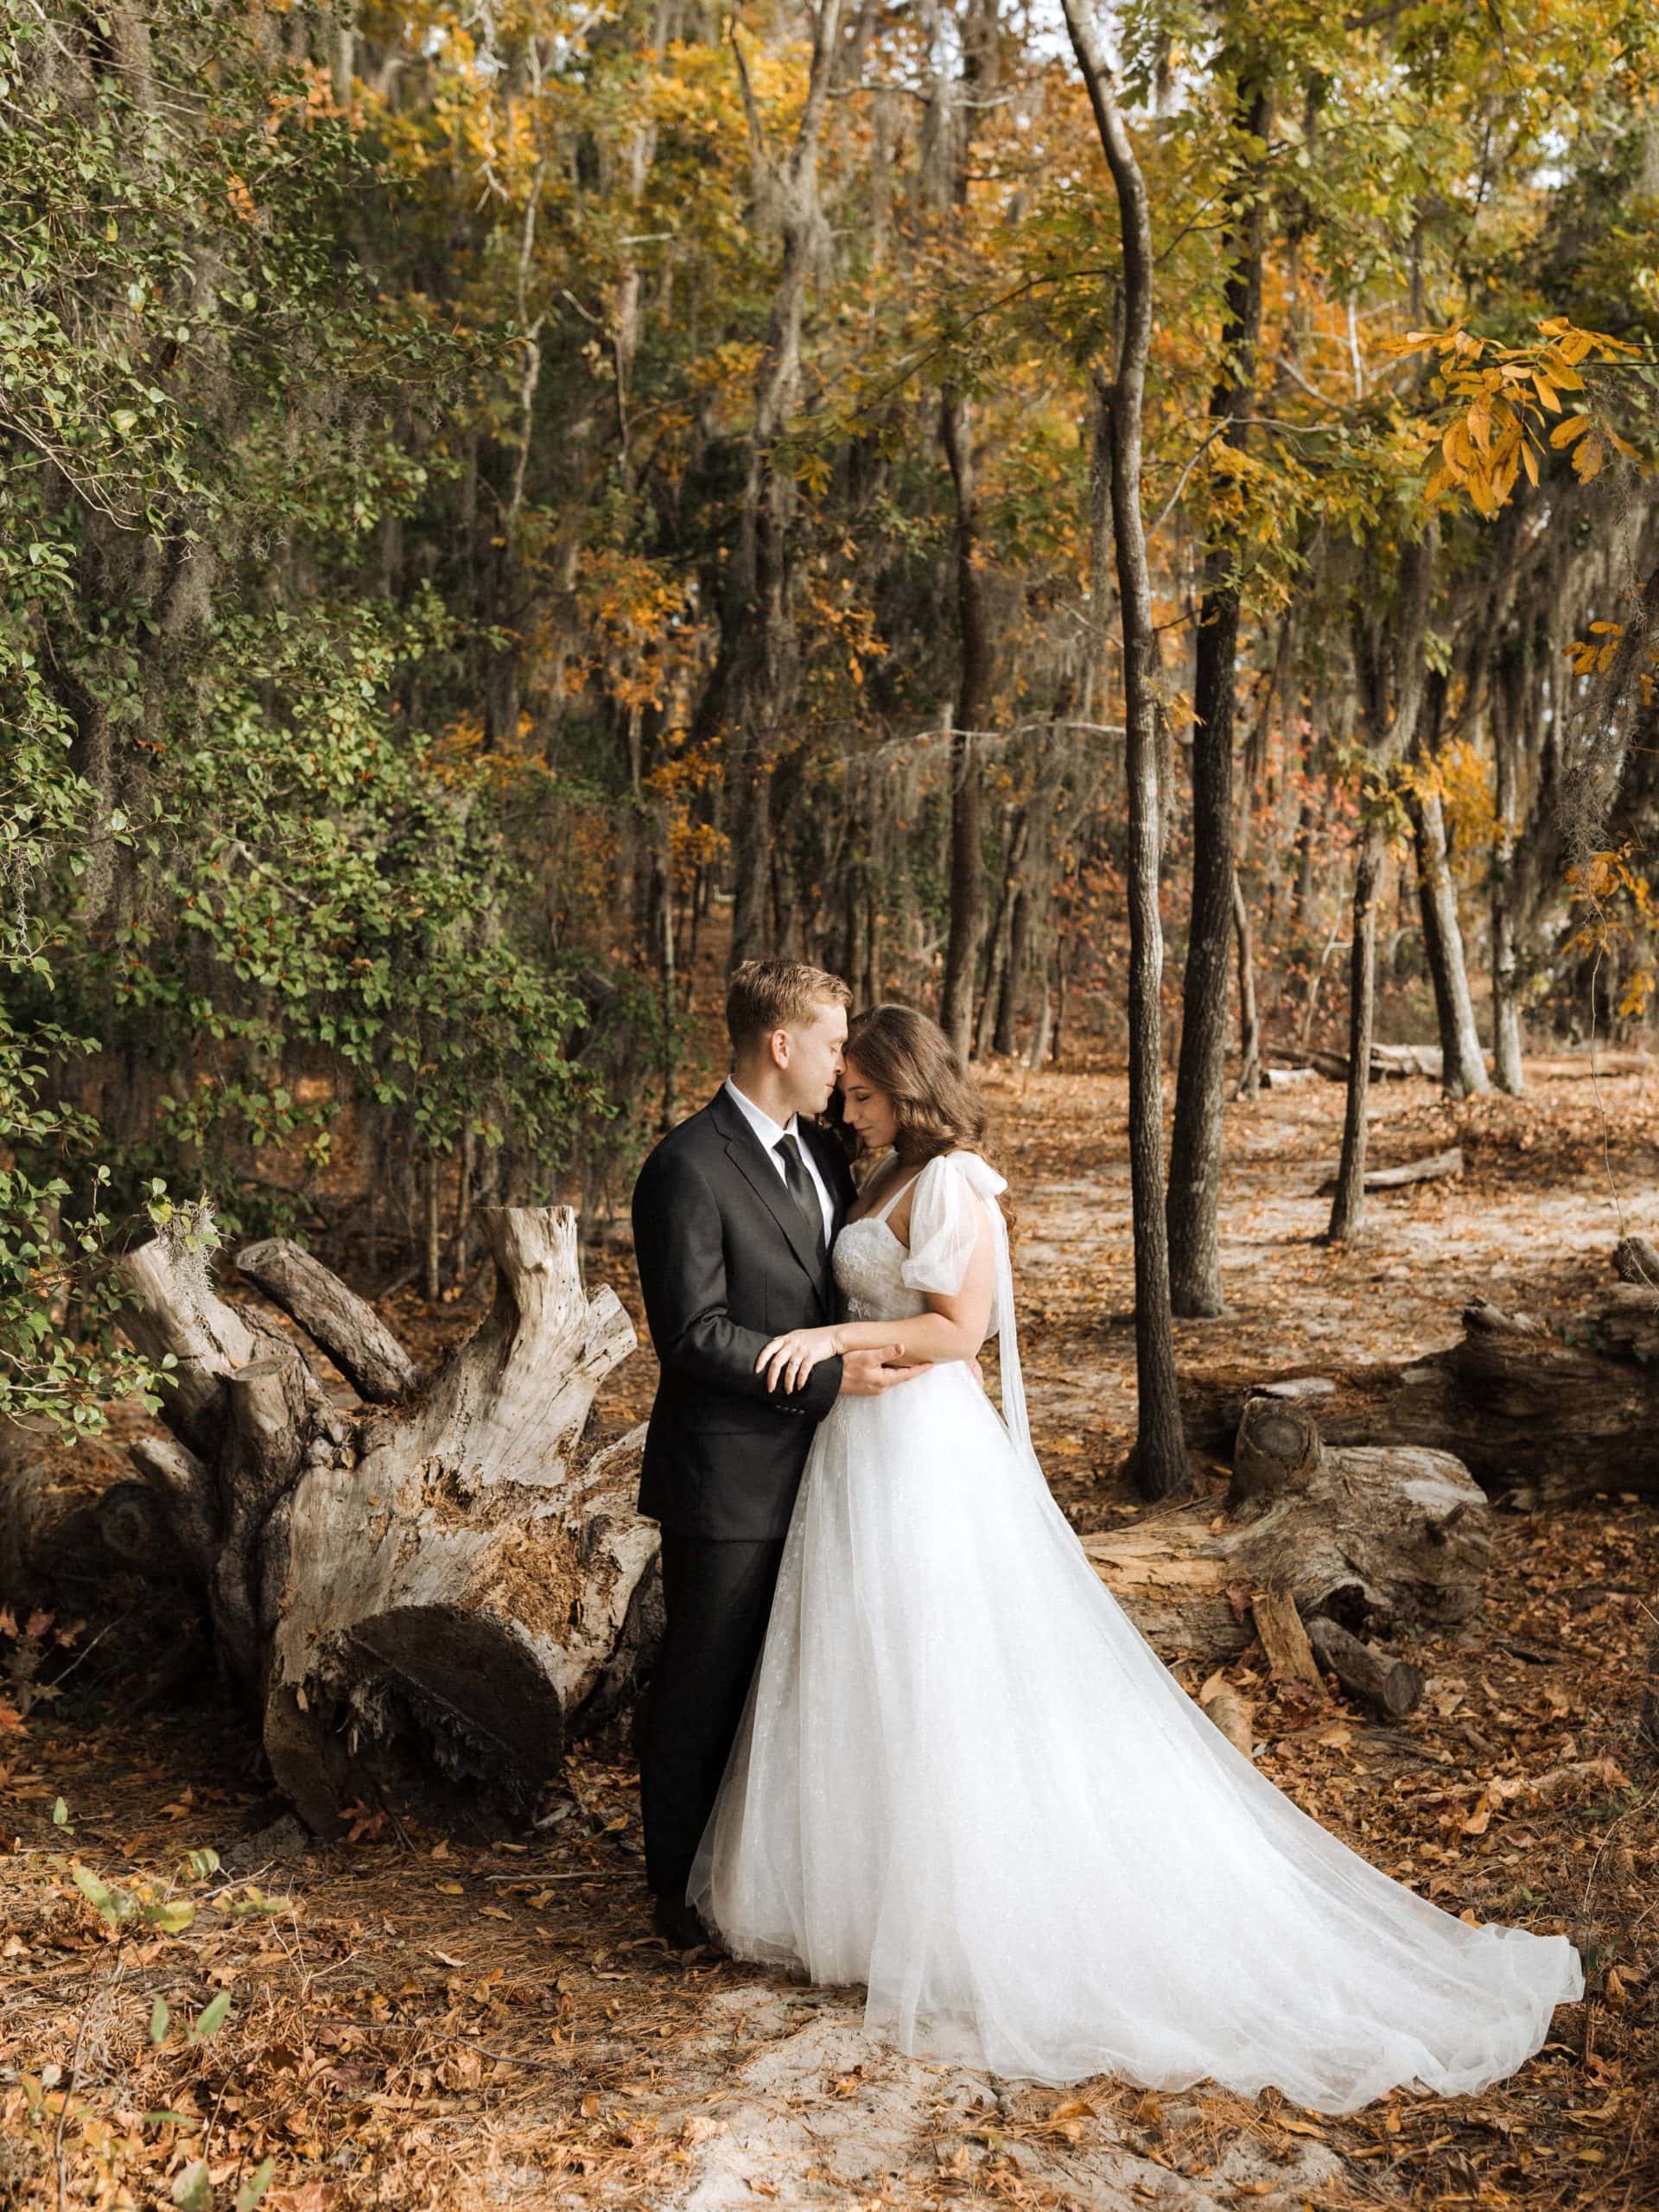 bride and groom portrait in a forest surrounded by spanish moss